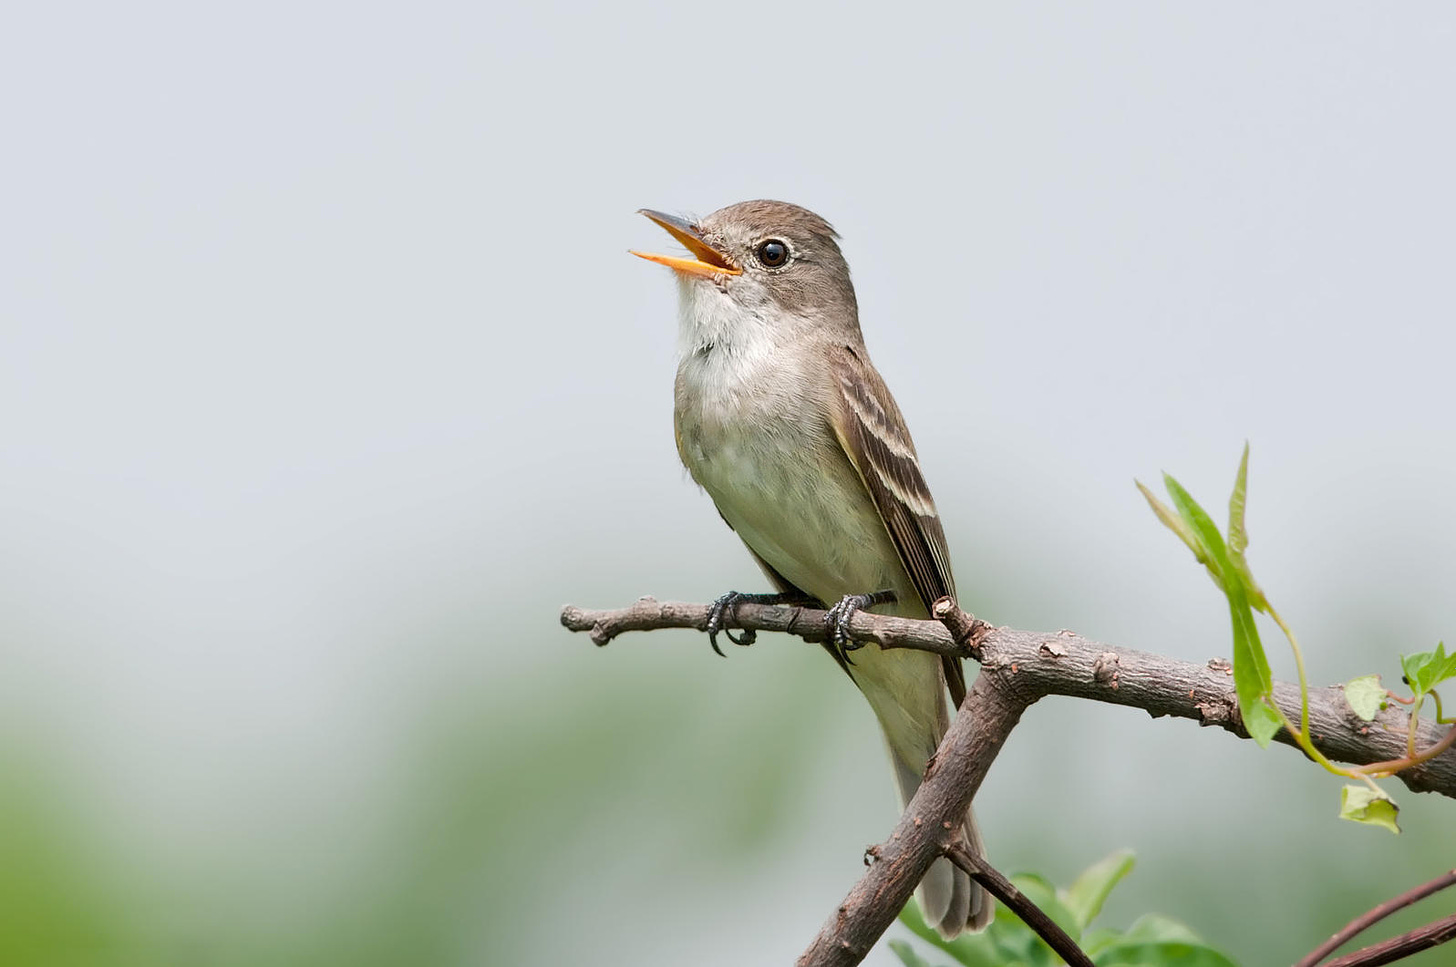 Home is a Healthy River for Southwestern Willow Flycatchers | Audubon  Southwest